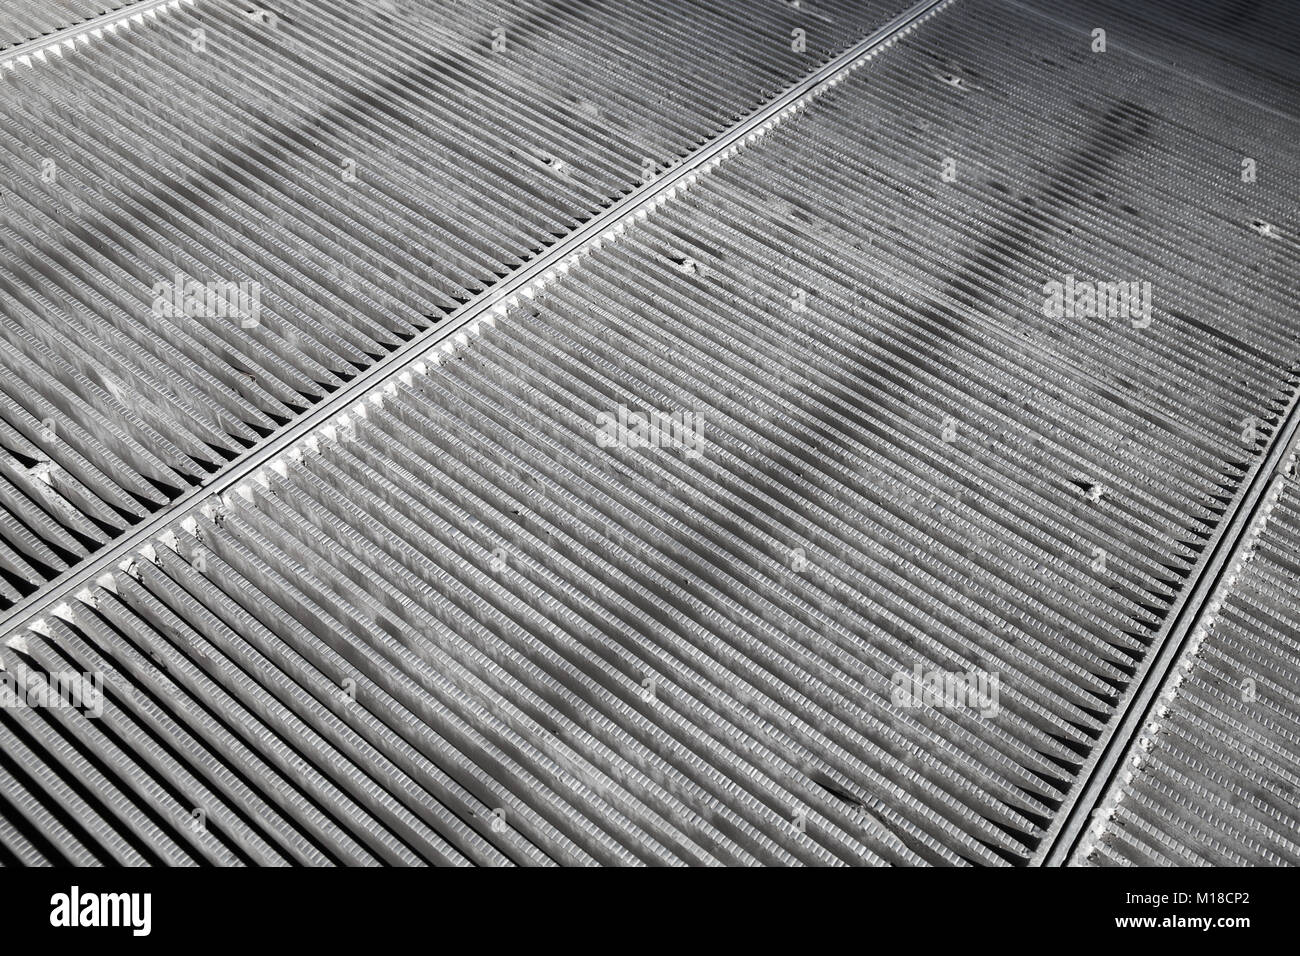 Steel grating of urban drainage system, abstract background photo Stock Photo